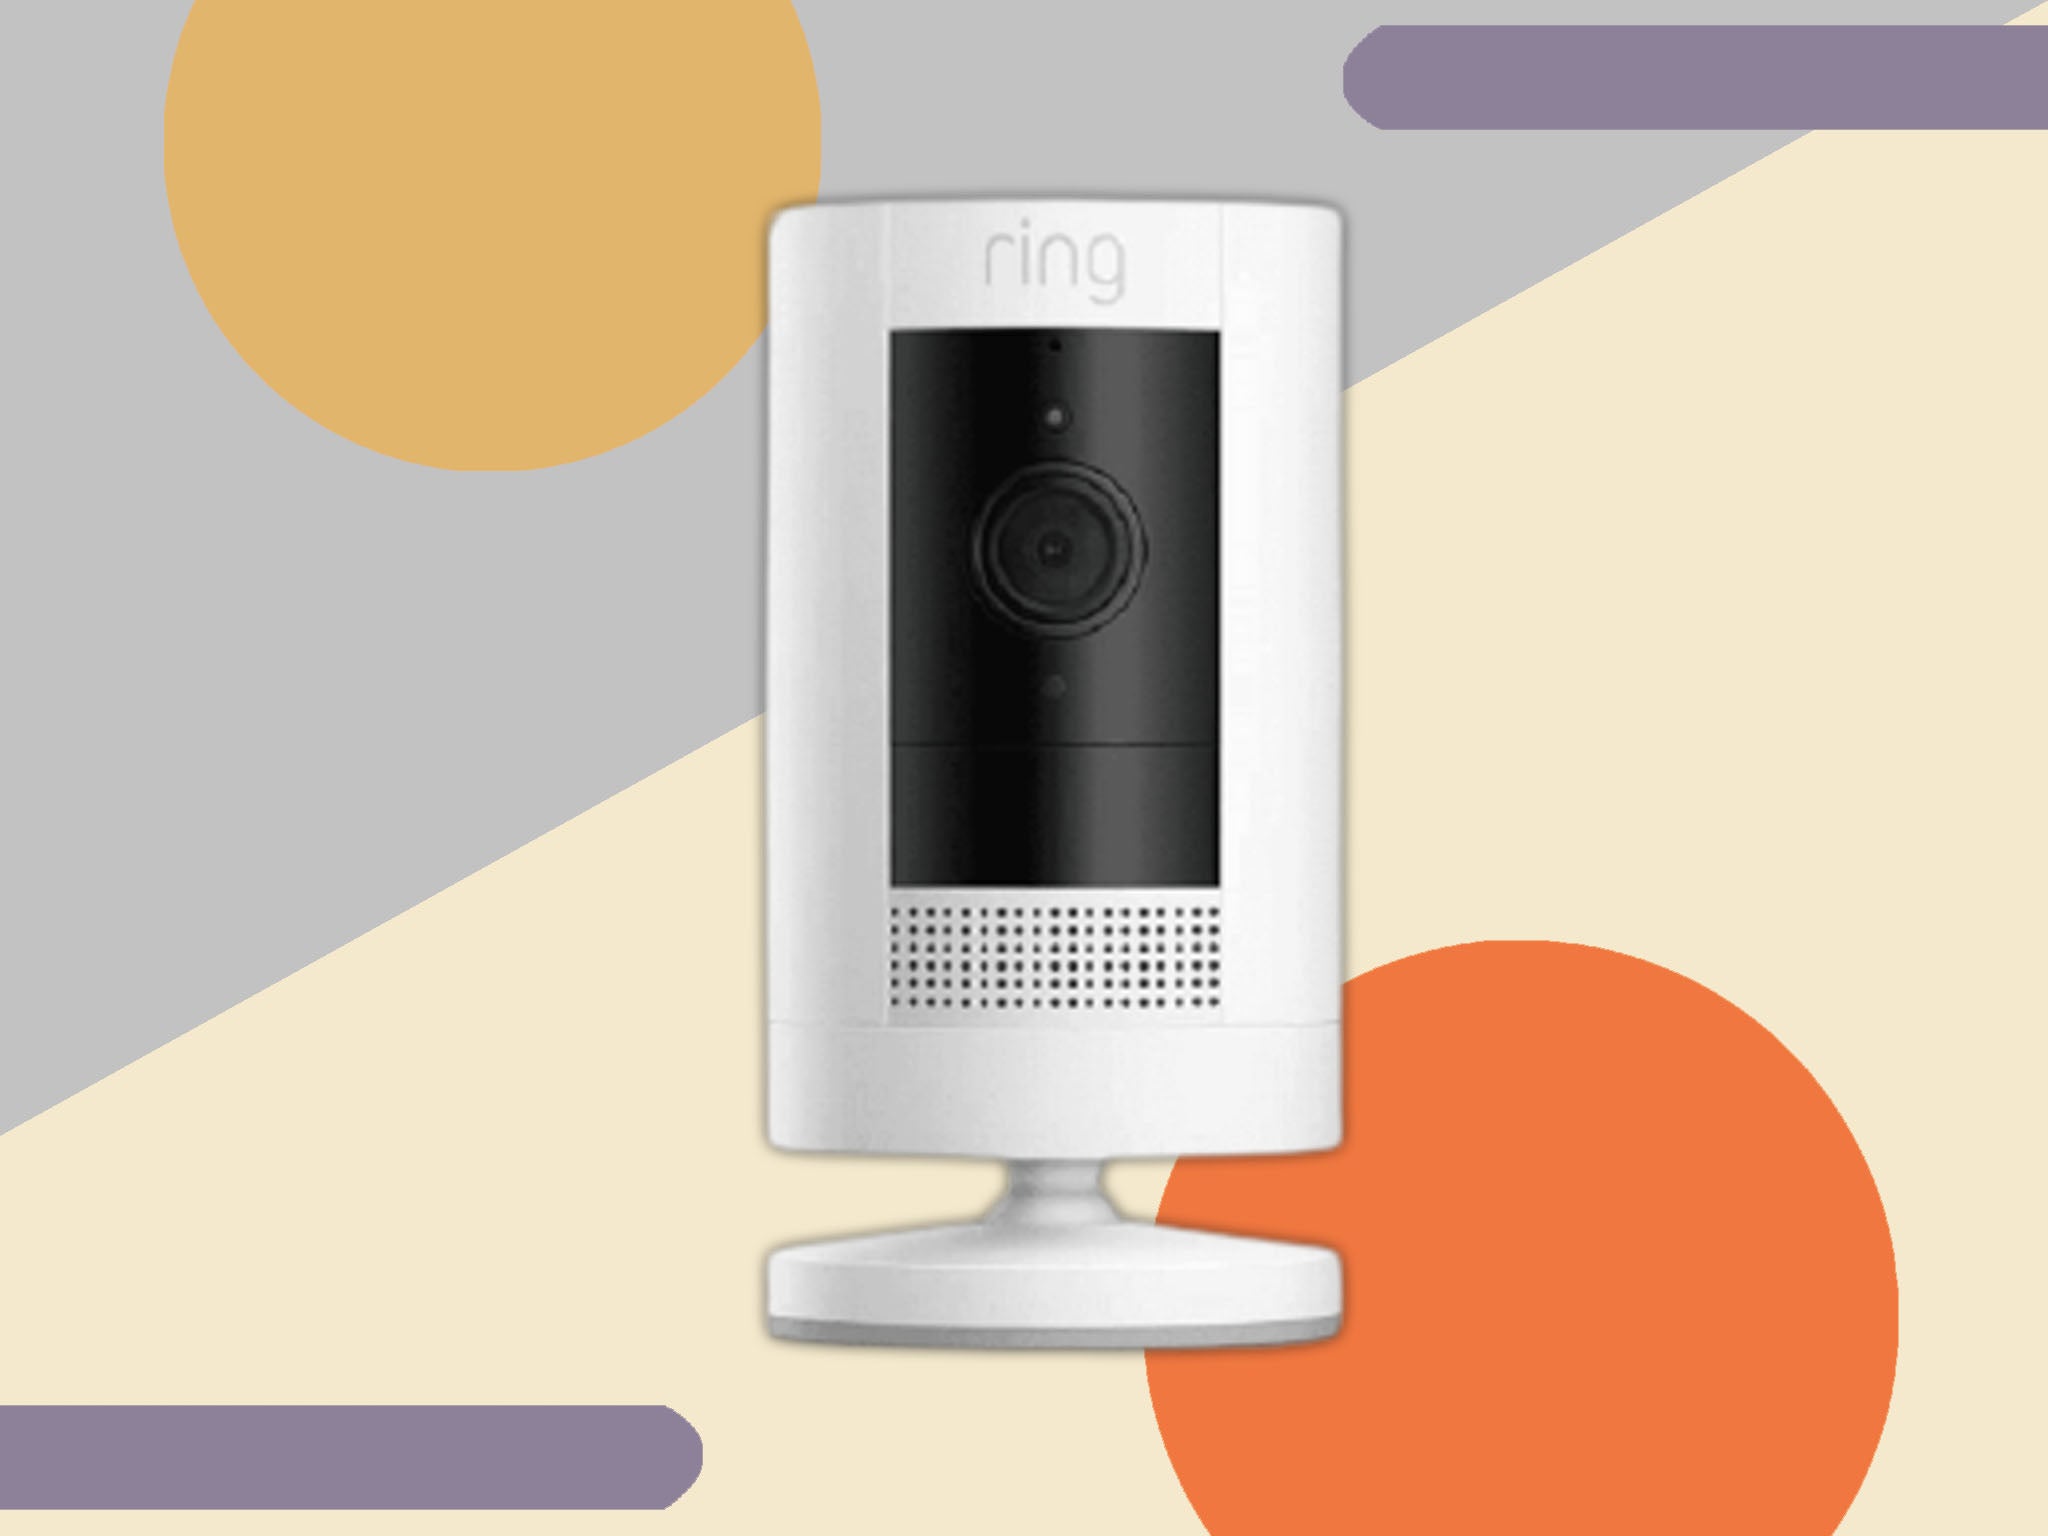 The camera’s simple cylindrical design allows you to place it wherever you like